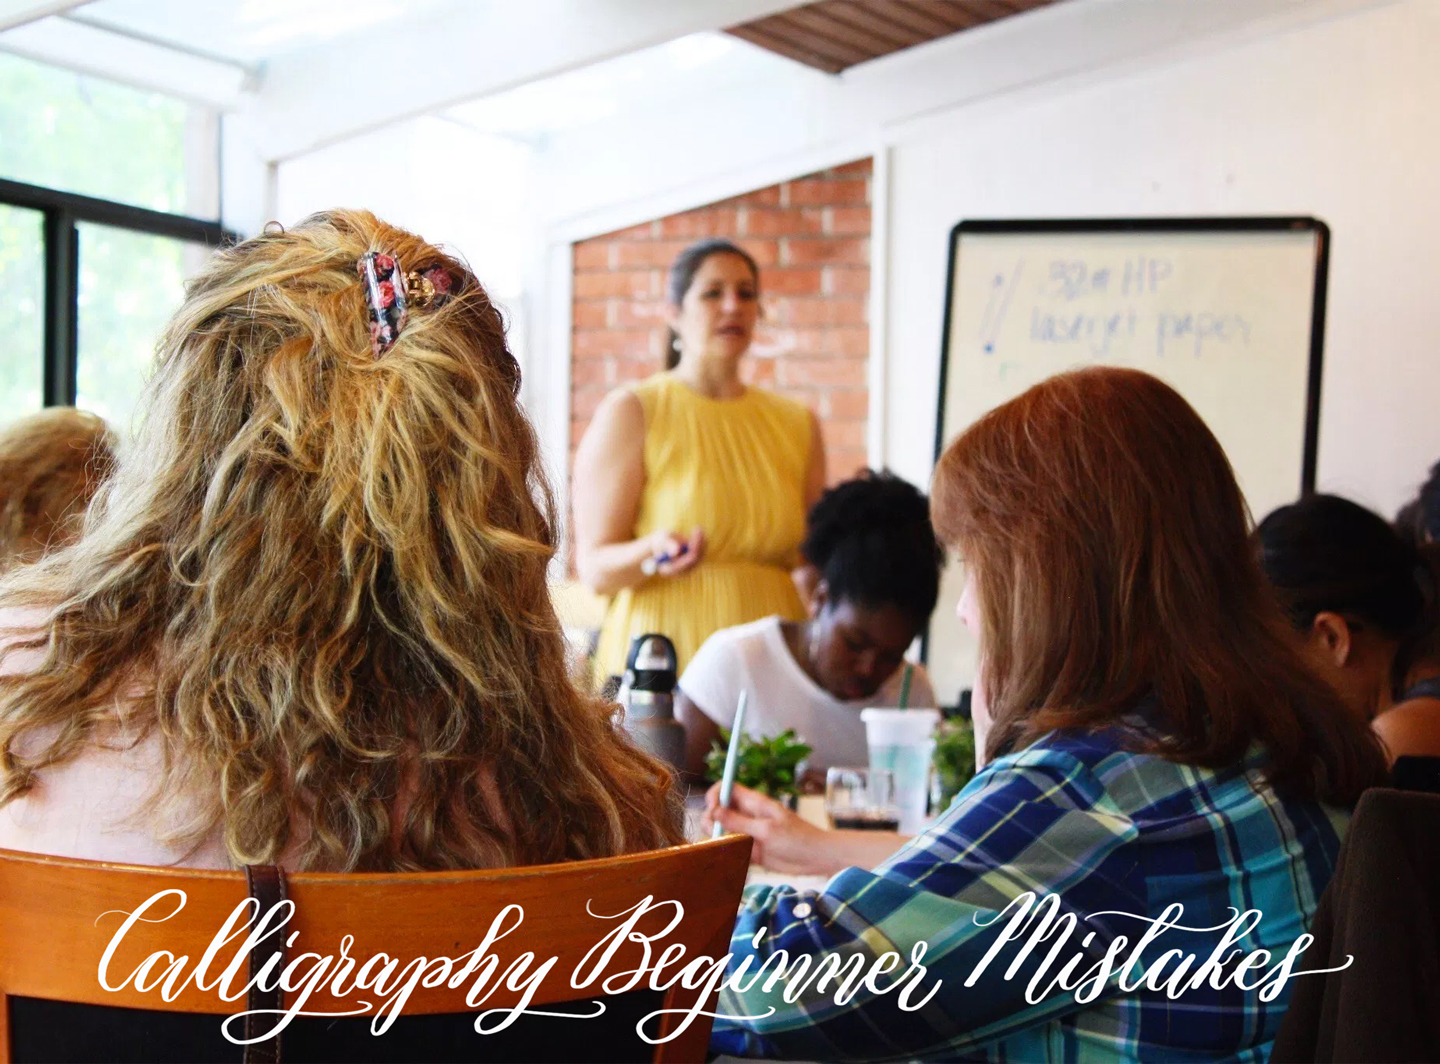 The Top Six Calligraphy Beginner Mistakes That I Observe at Workshops